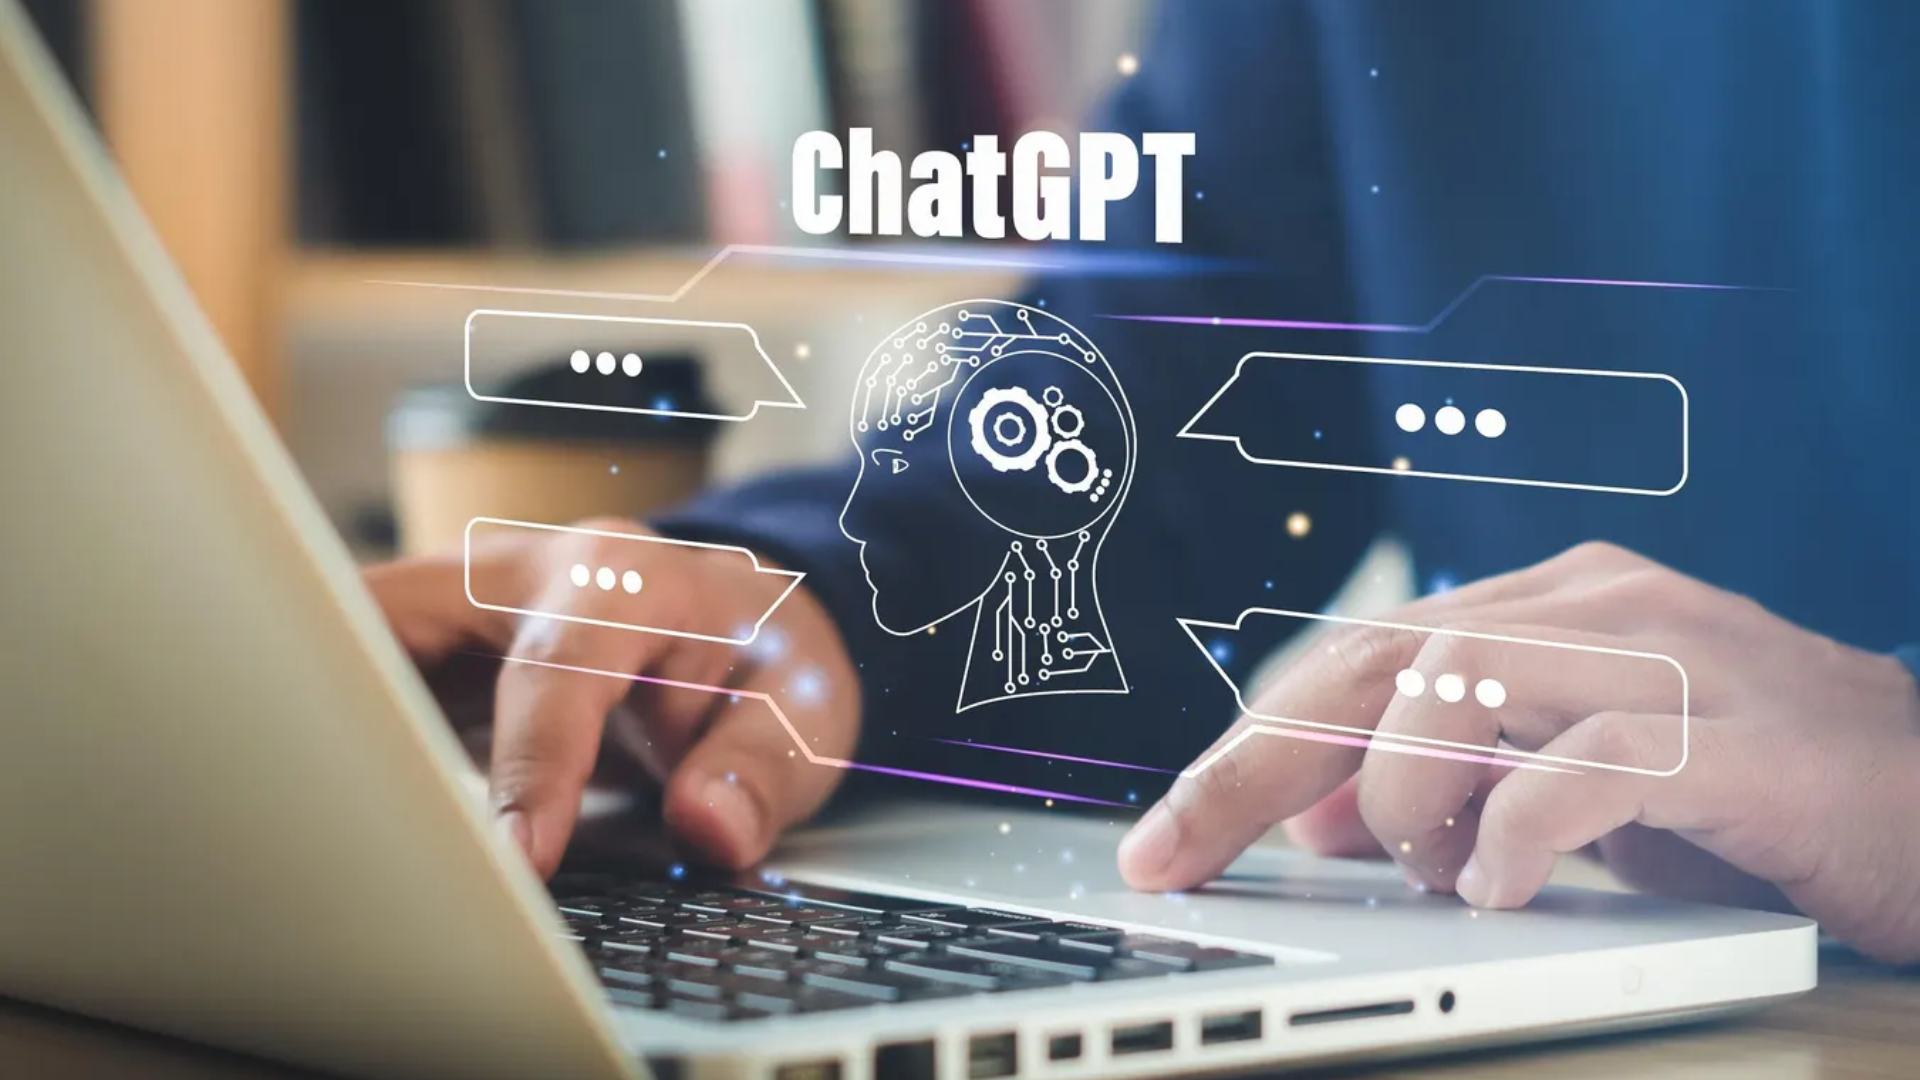 Vienna Privacy Group Files Complaint Against ChatGPT Over Accuracy Concerns